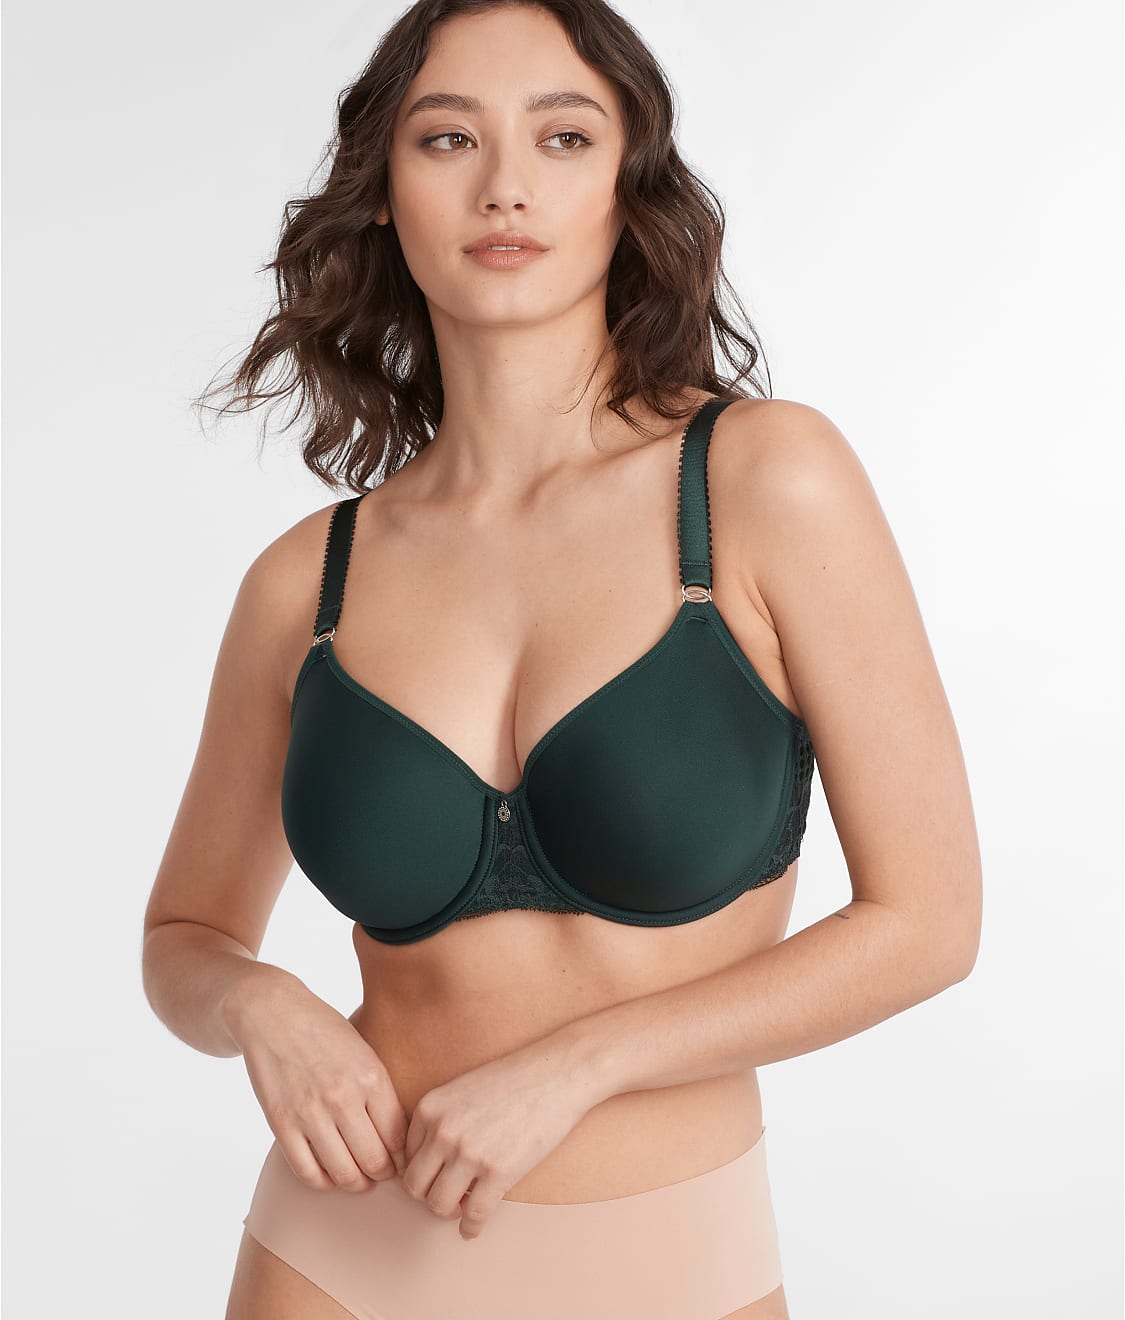 Full Figure Figure Types in 32G Bra Size GG Cup Sizes Natural Beige by  Fantasie Convertible and Moulded Bras